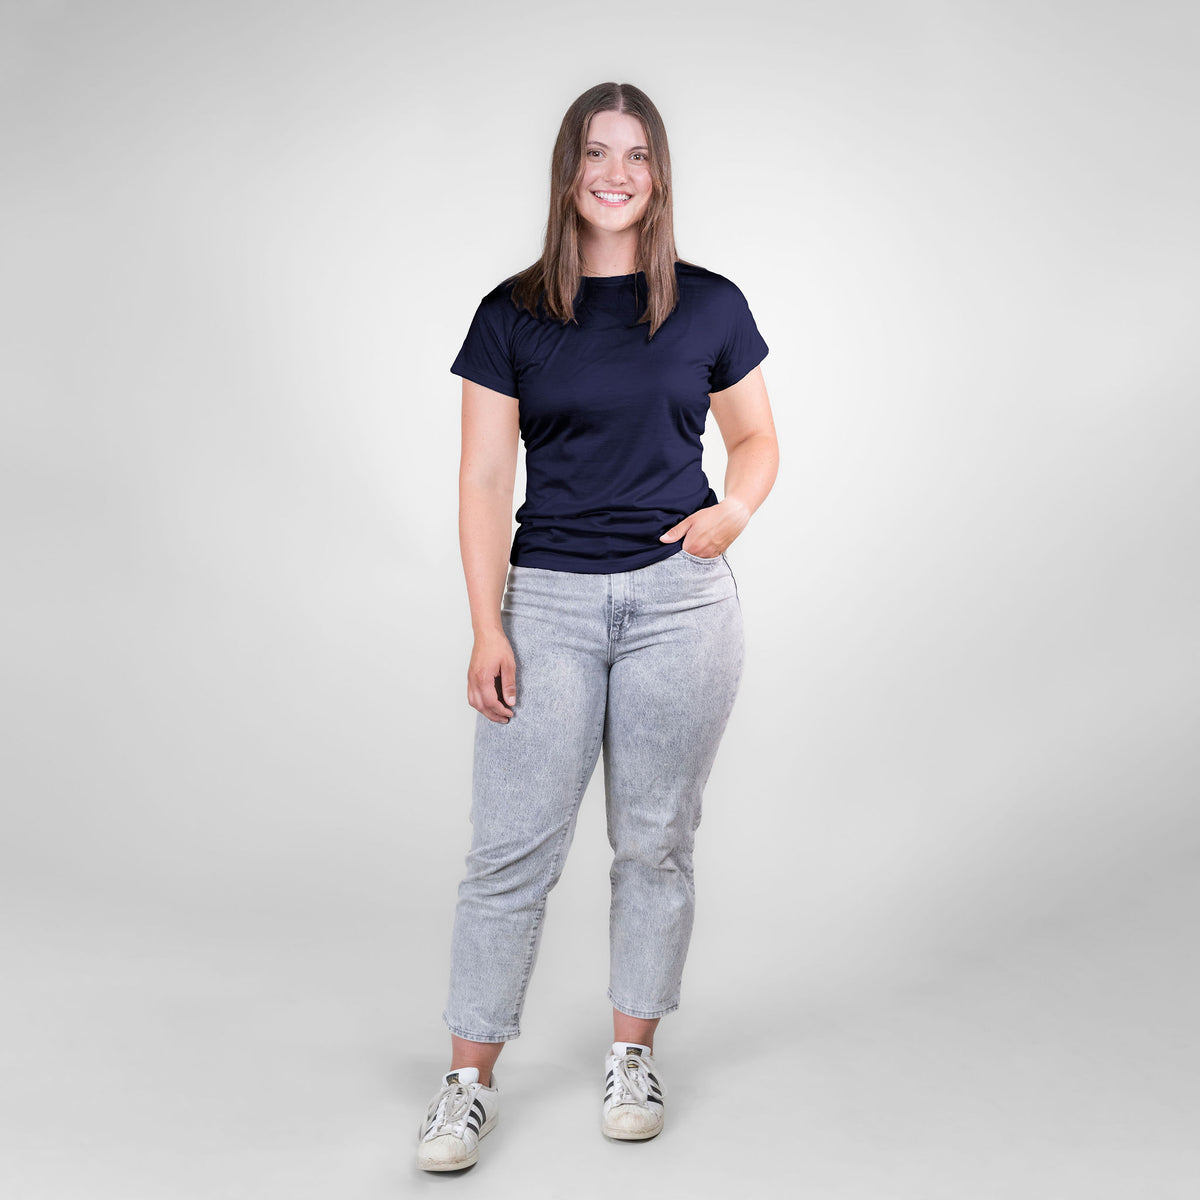 A full body photo of a smiling brown haired woman standing against a white background. She is wearing white sneakers, gray jeans, and a navy blue Alpacas of Montana lightweight athletic activewear outerwear breathable moisture wicking antimicrobial soft comfortable exercise short sleeve alpaca women&#39;s performance tee for running sports exercise work out hiking climbing camping skiing biking